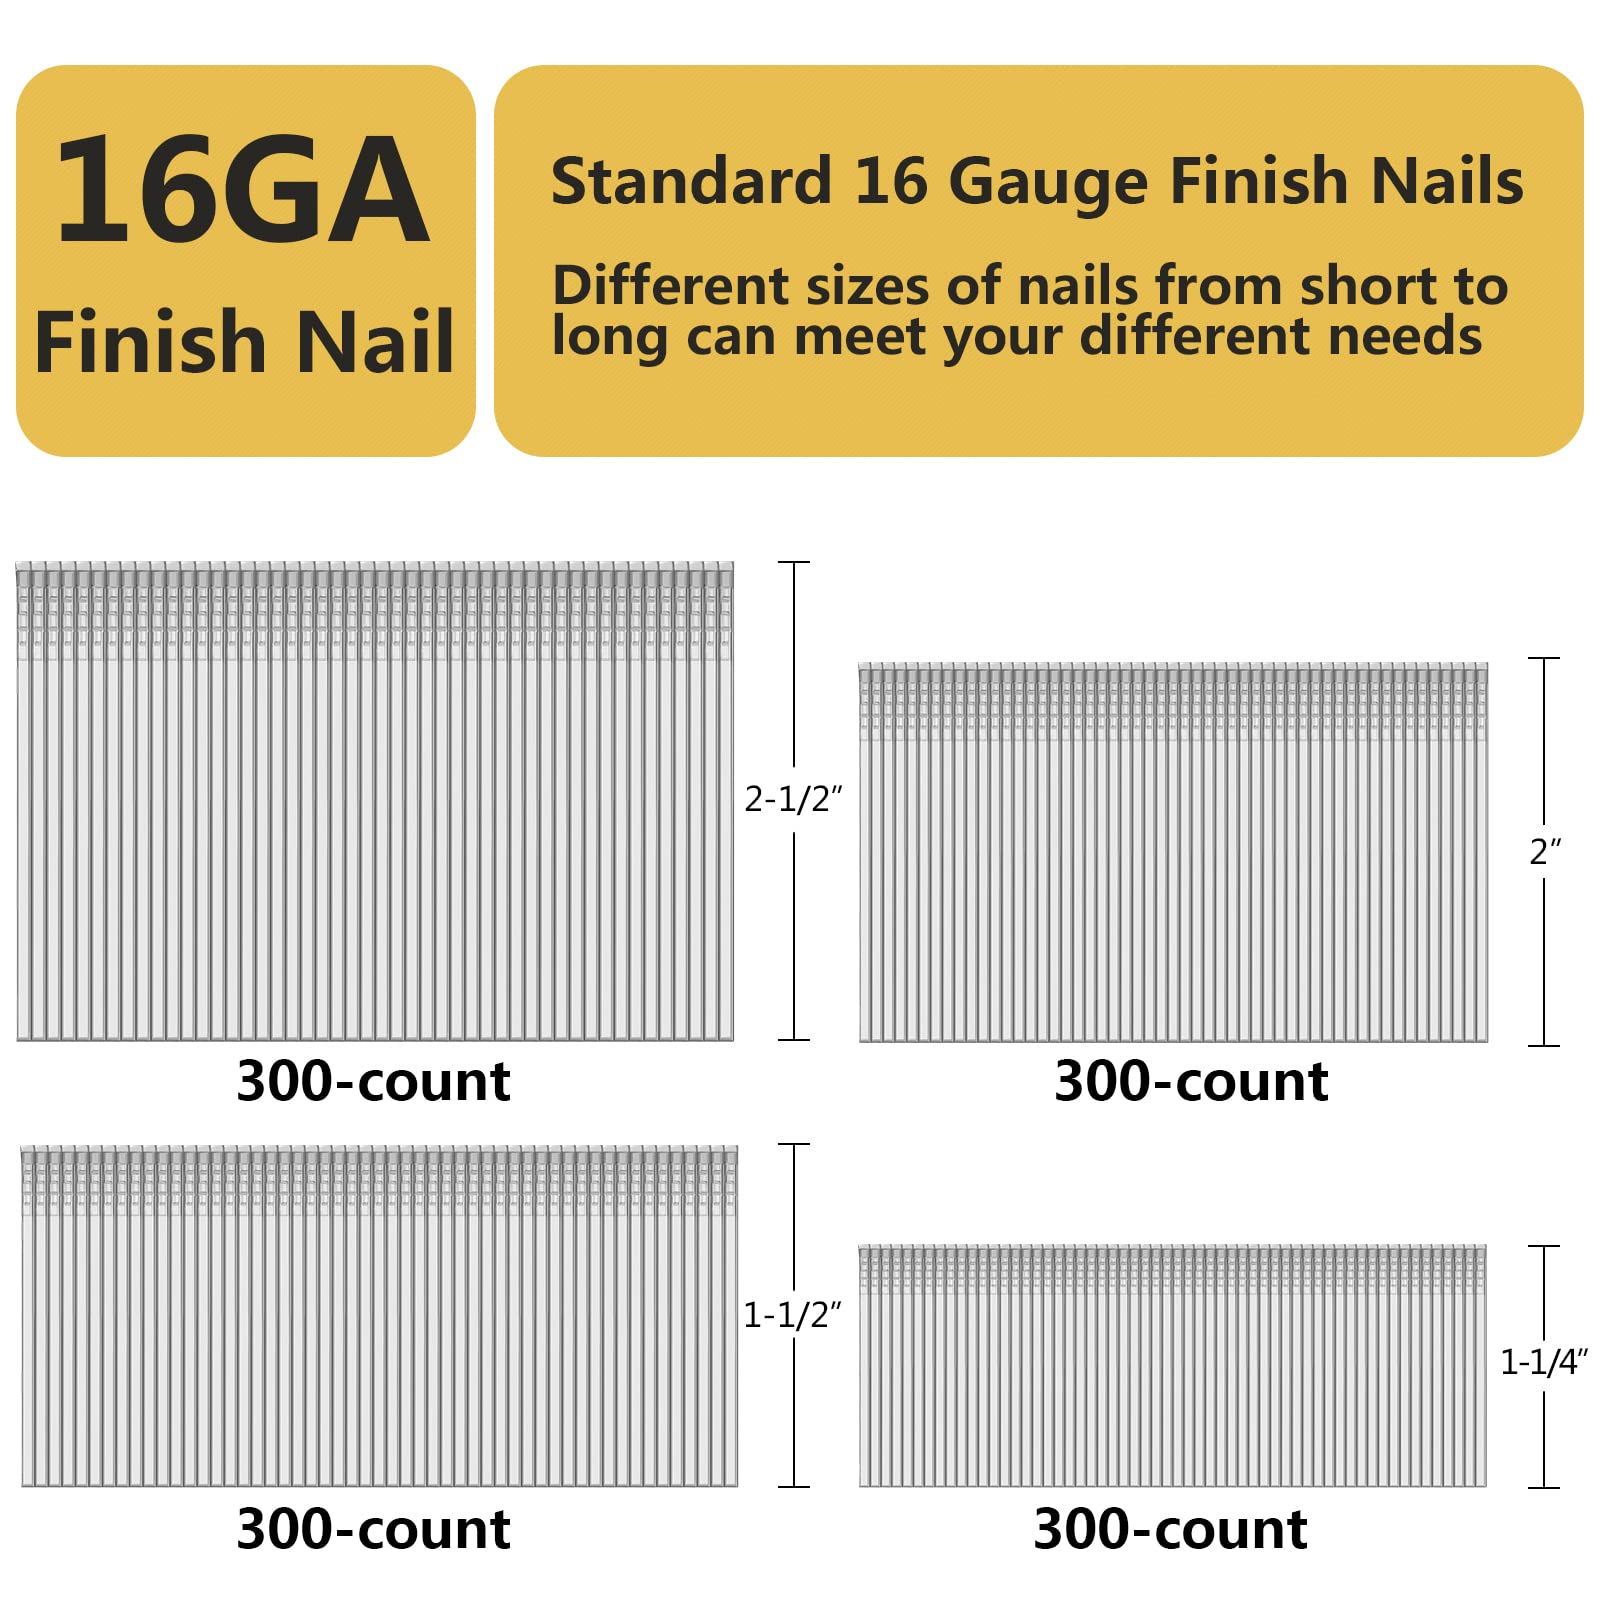 SimCos 16 Gauge Straight Finish Nails,1-1/4", 1-1/2", 2", 2-1/2", Assorted Size Project Pack for Pneumatic, Electric Finish Nailer or Nail Gun (Galvanized Steel)